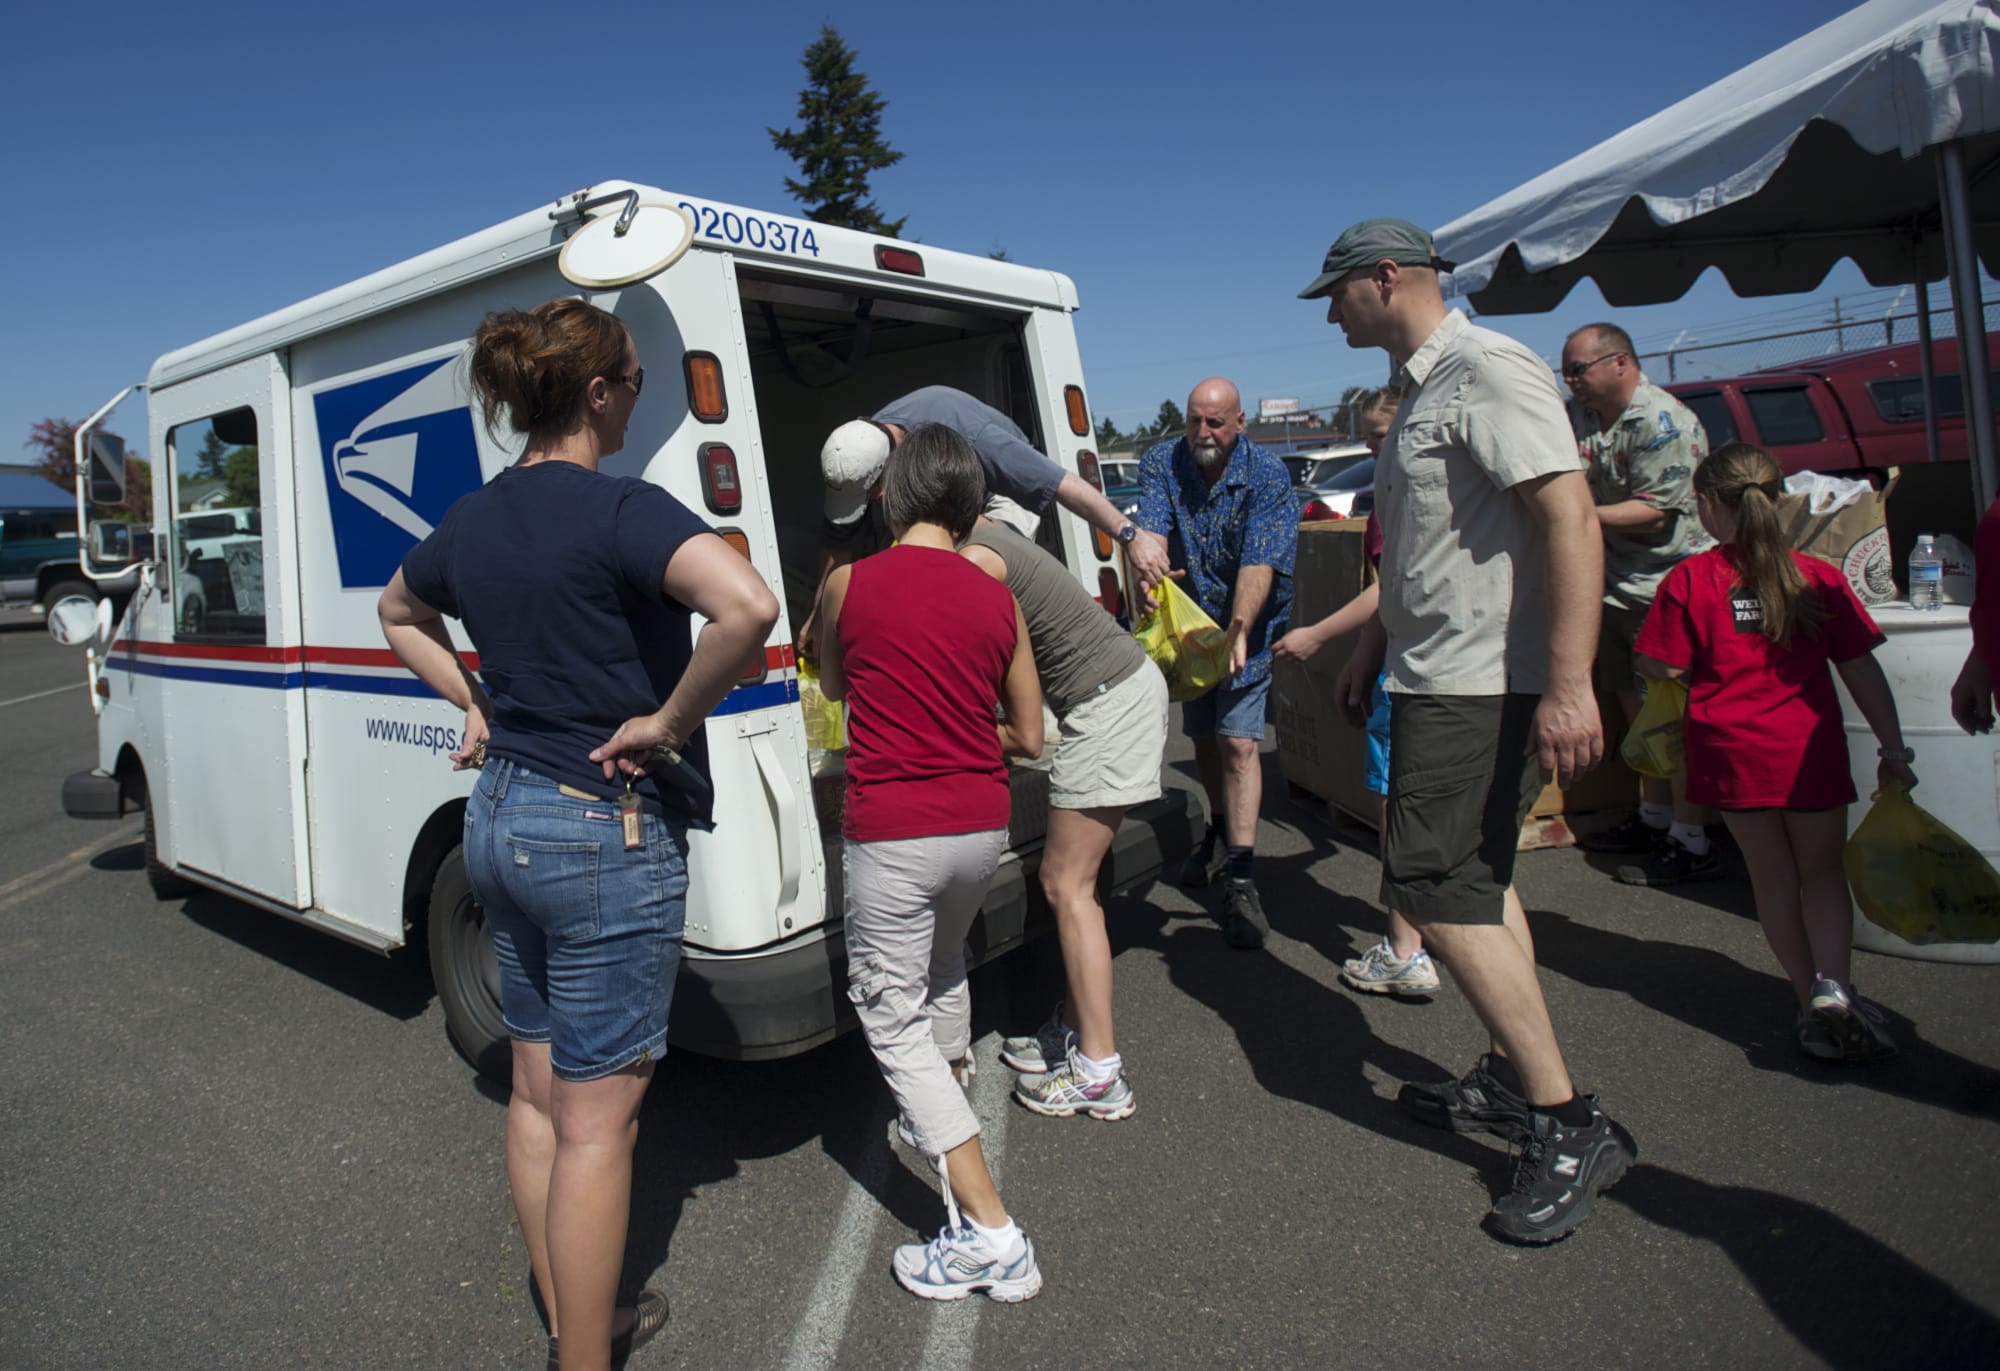 Volunteers help unload a mail truck filled with canned goods during the annual letter carriers' food drive.